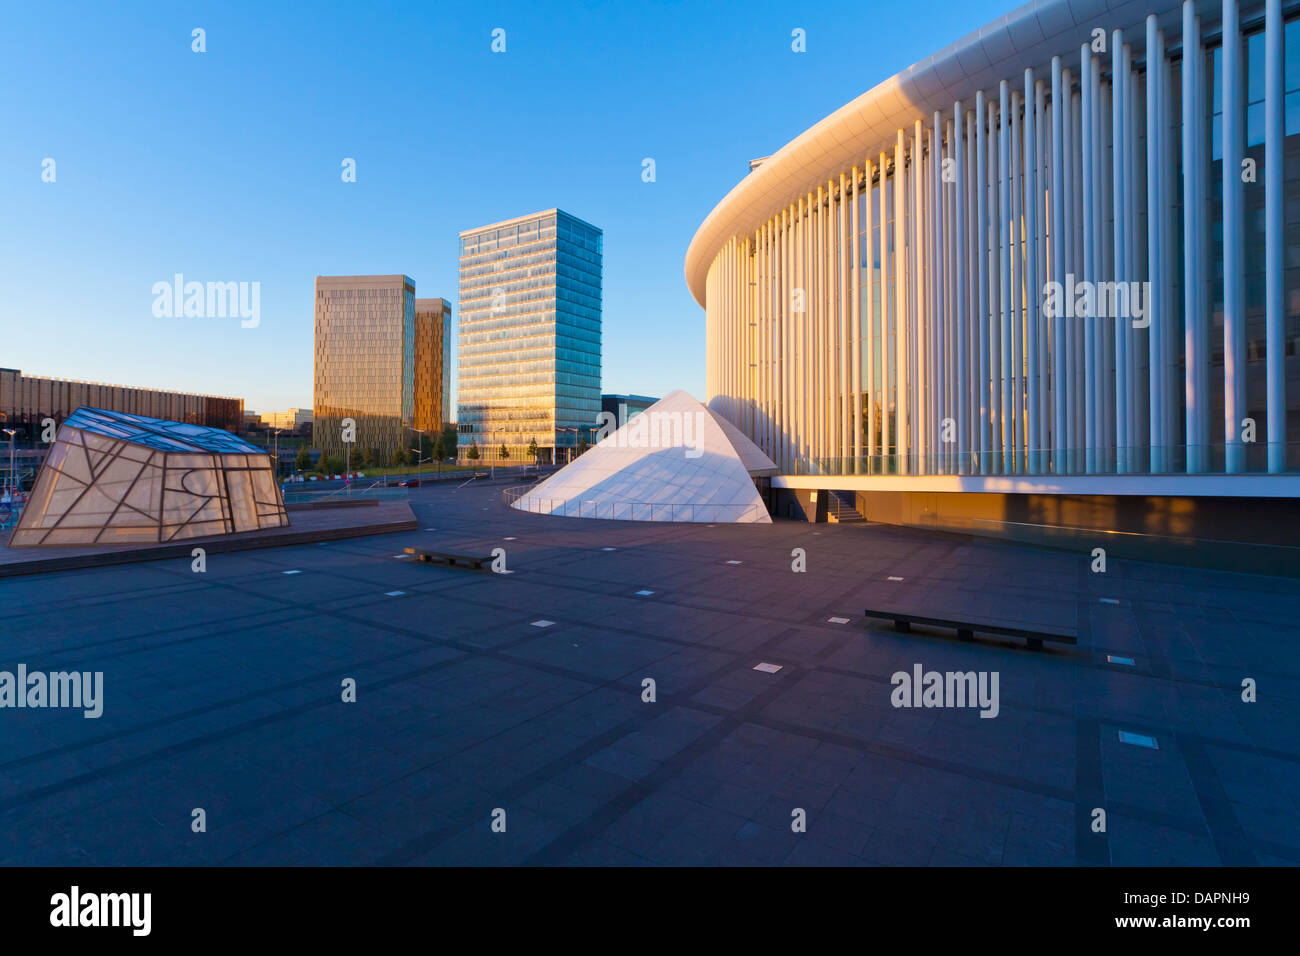 Luxembourg, View of Philharmonie with Parliament building in background Stock Photo